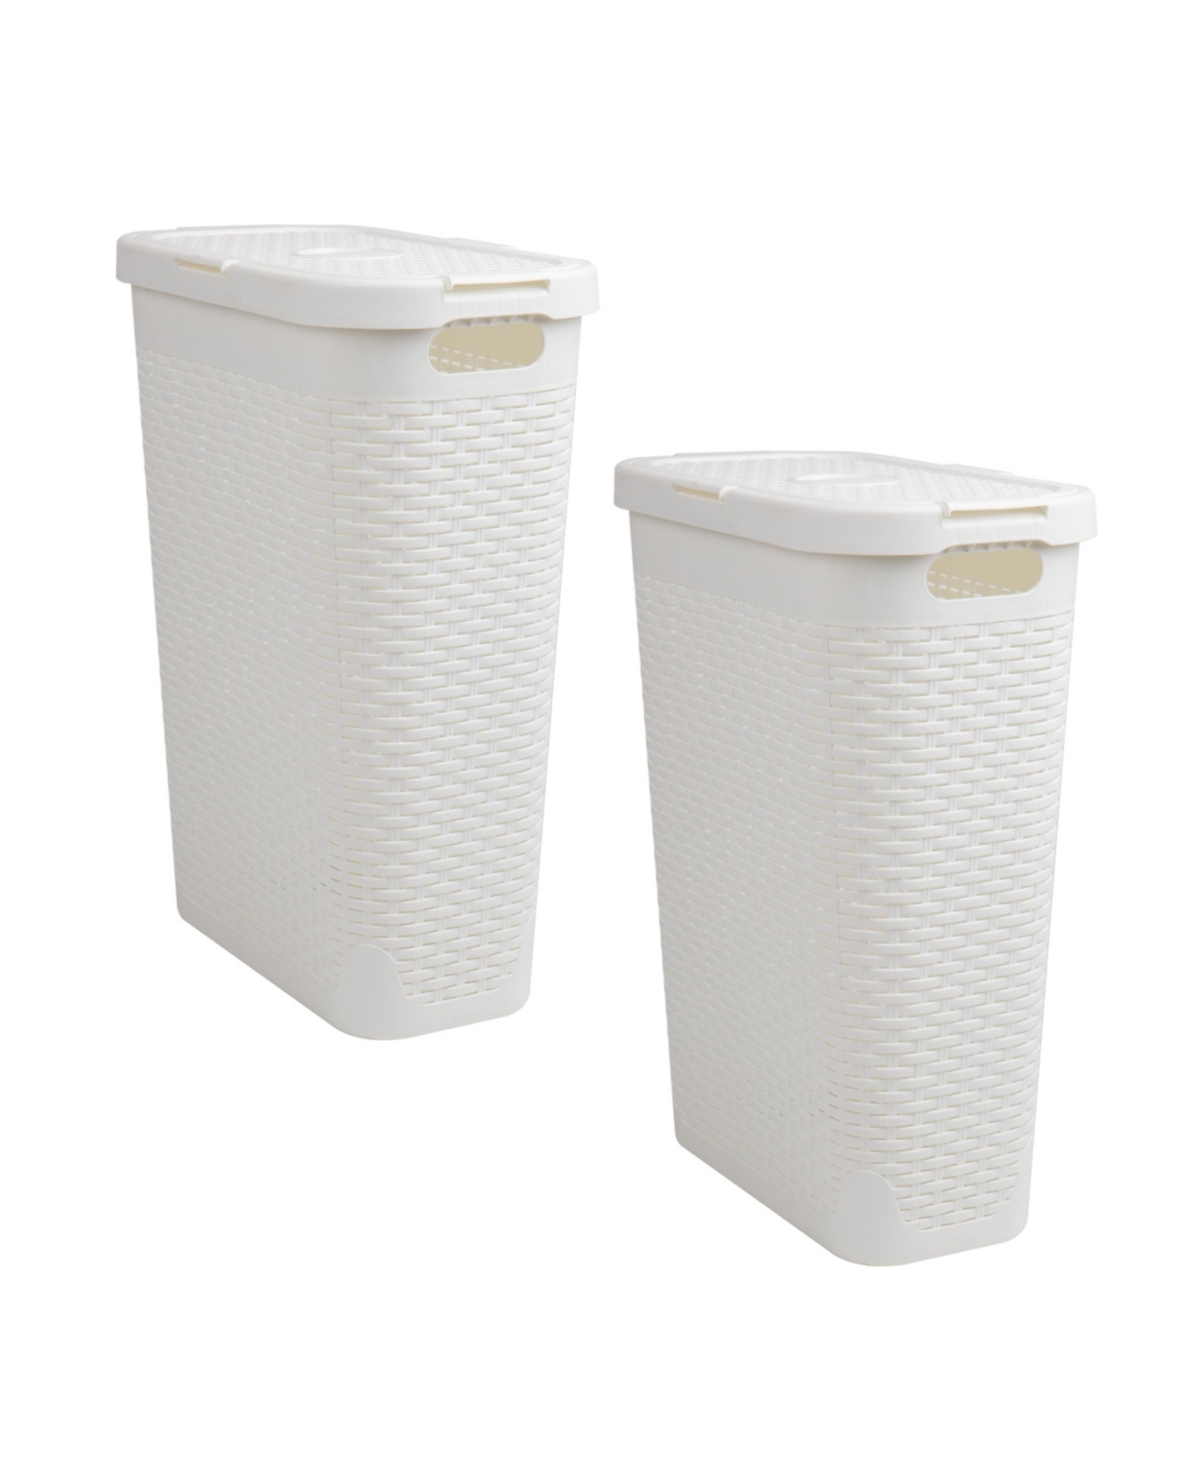 Basket Collection, Slim Laundry Hamper, 40 Liter 15kg, 33lbs Capacity, Cut Out Handles, Attached Hinged Lid, Ventilated, Set of 2 - White